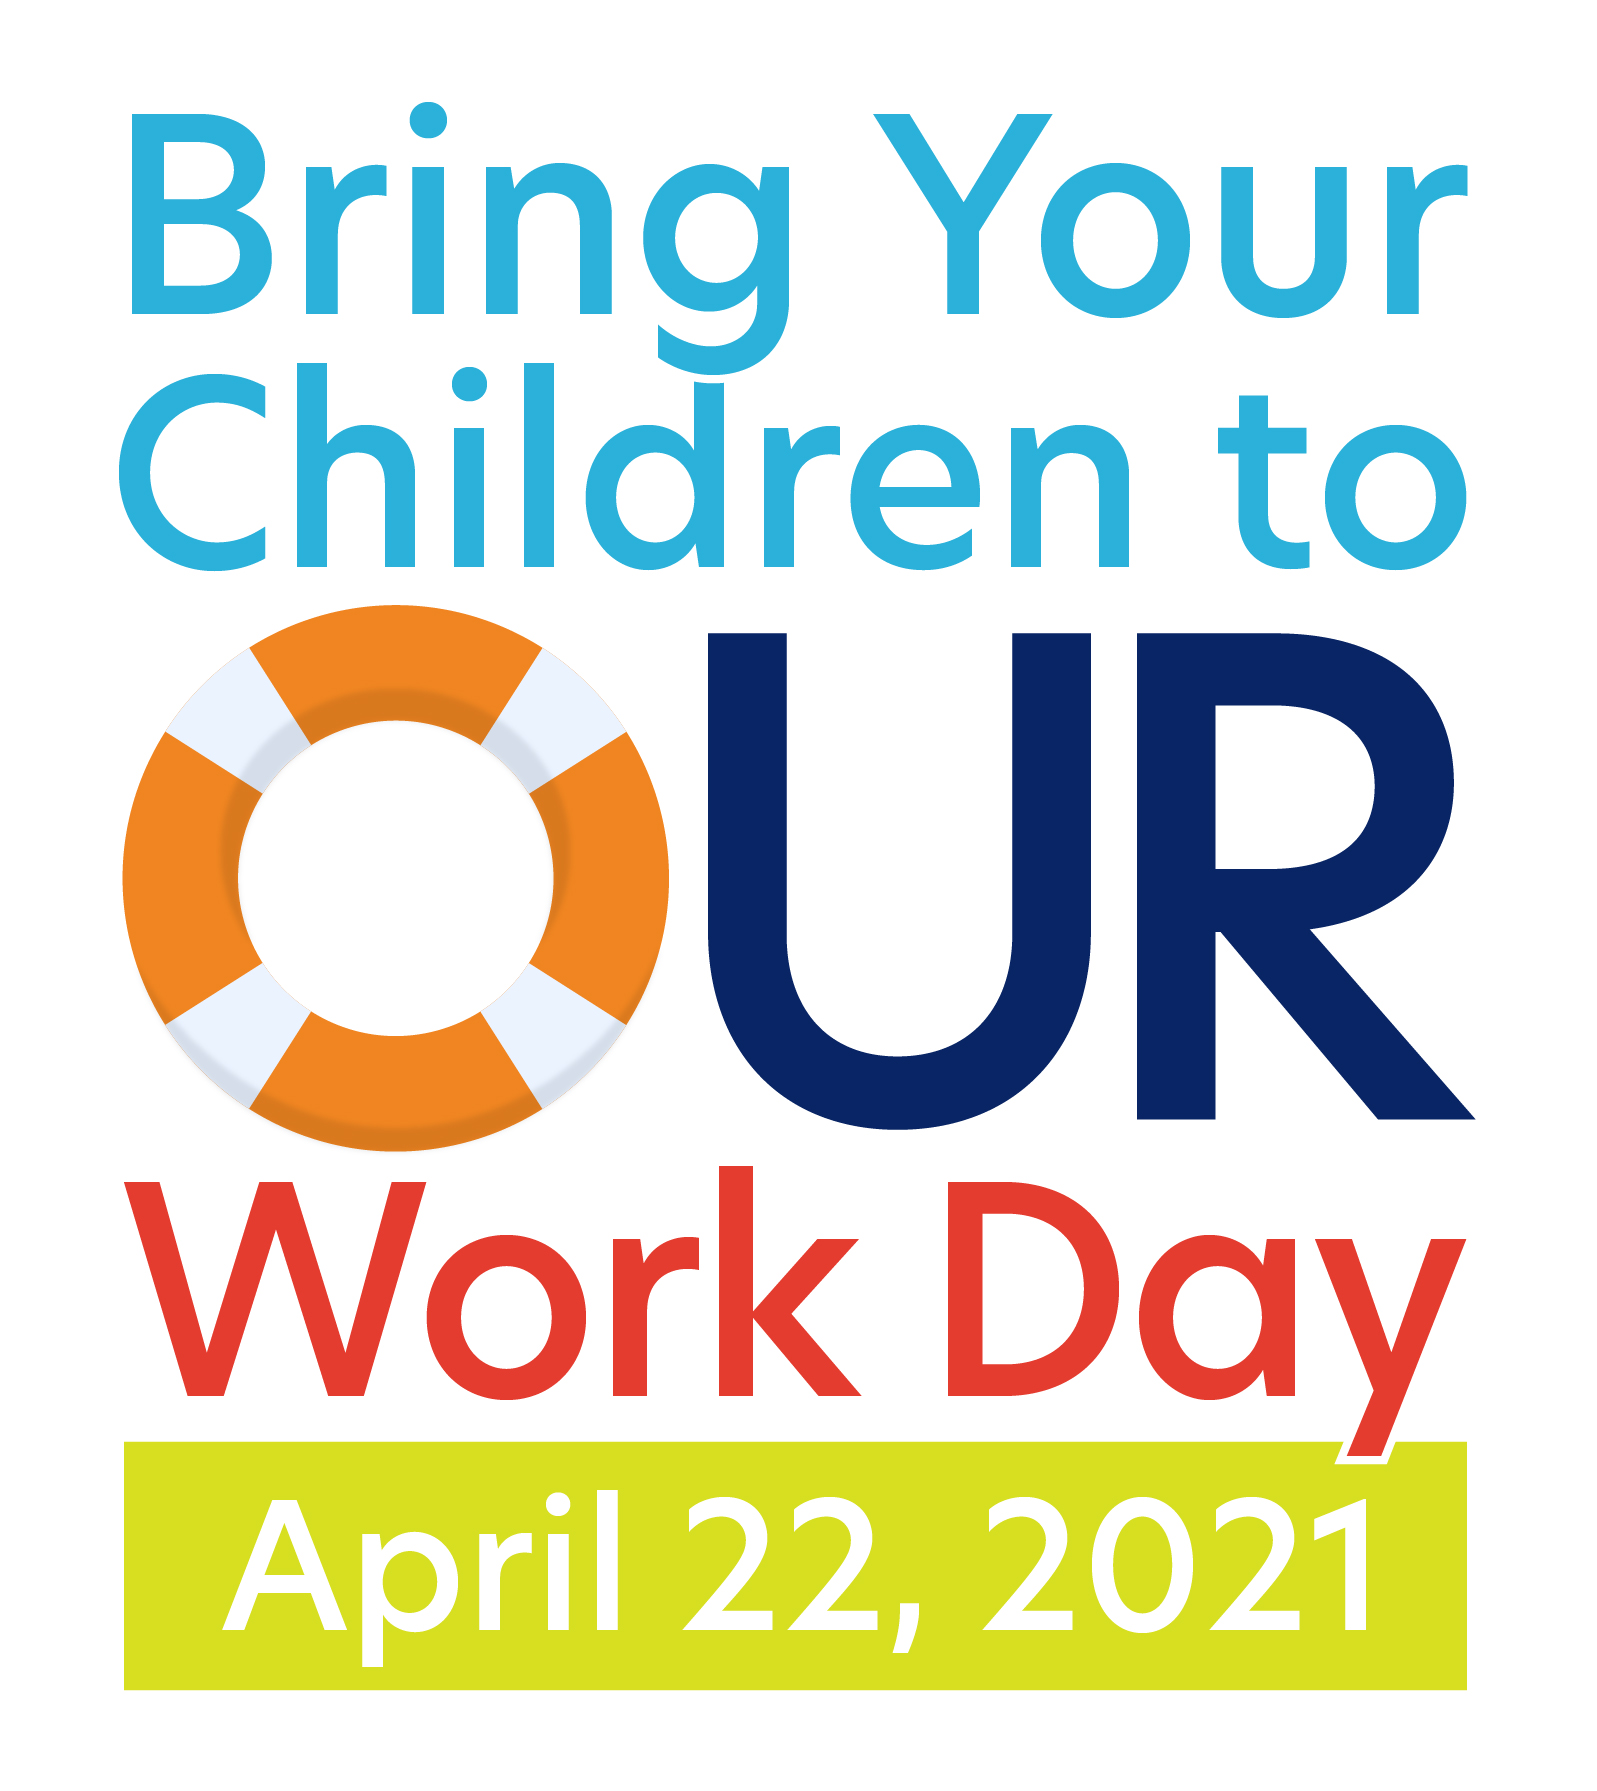 Bring your Child to our Work Day